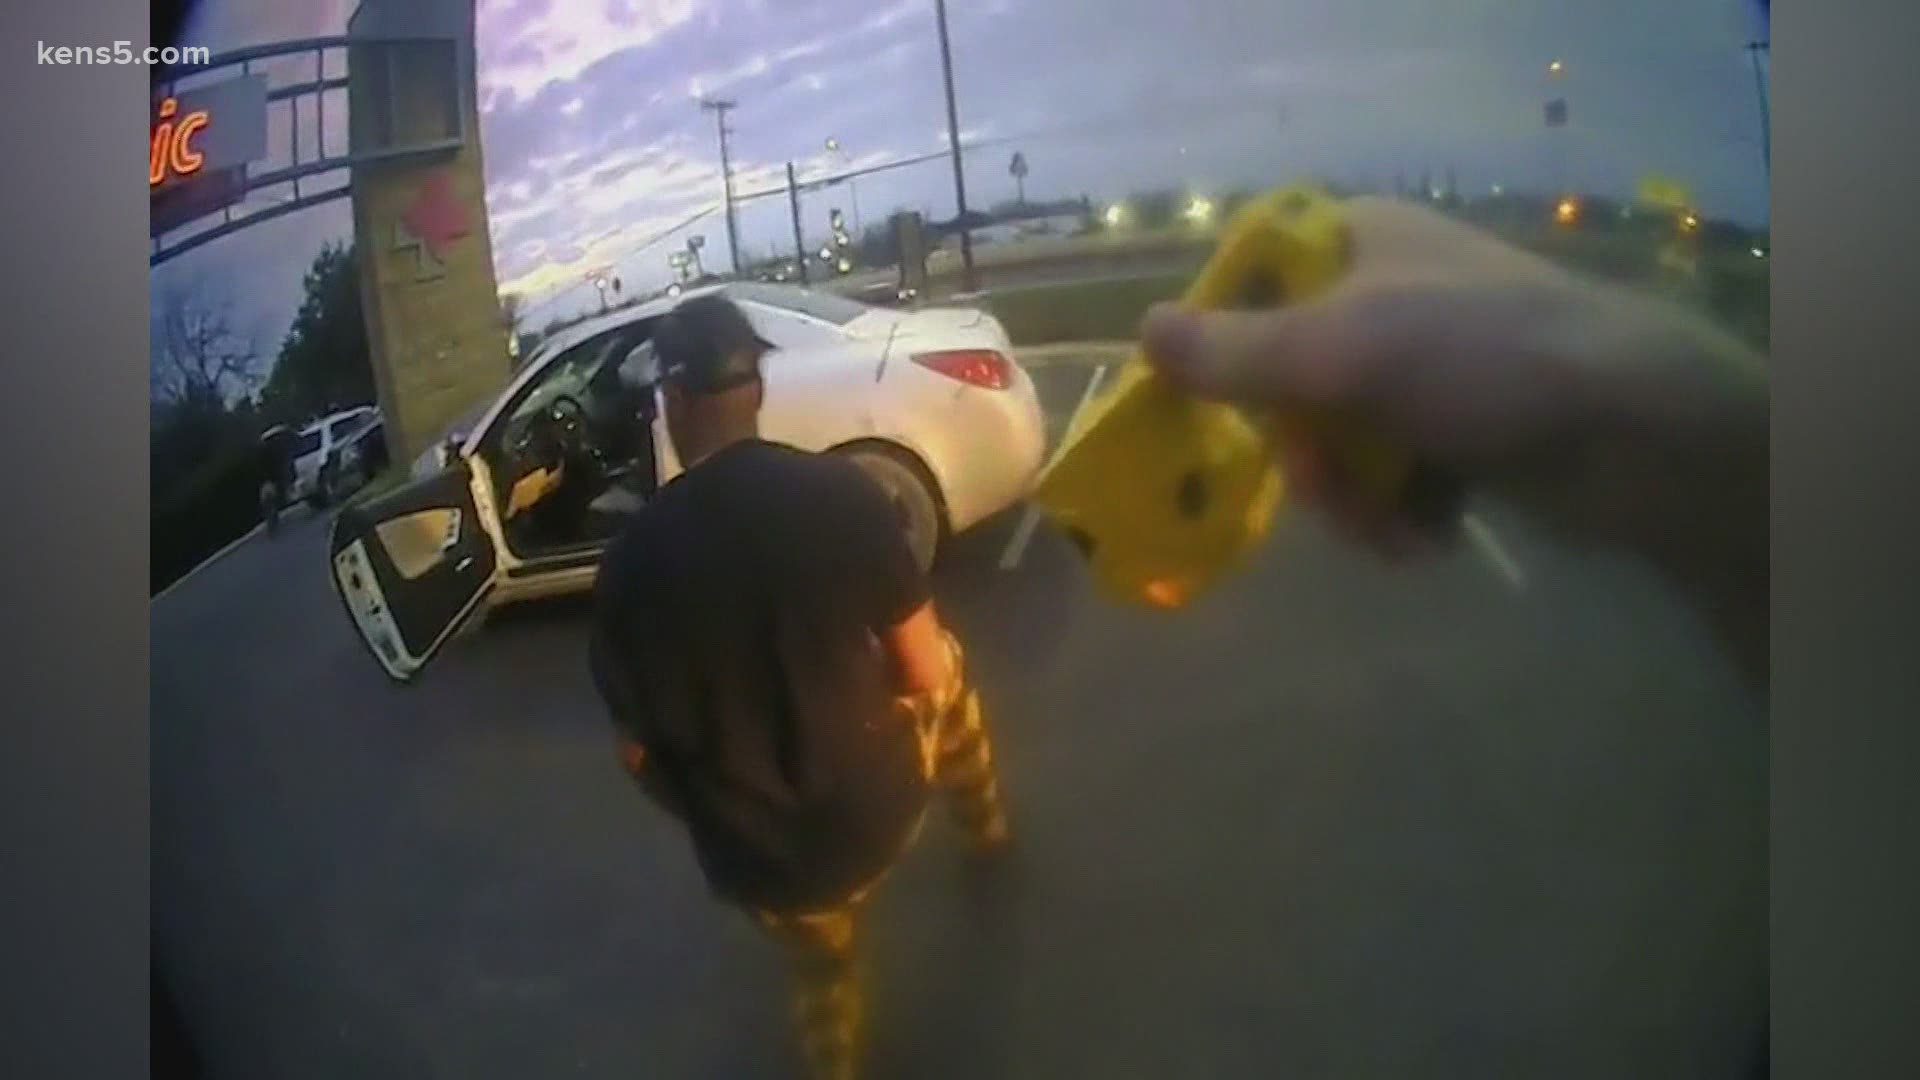 The driver seen being tased and later arrested in bodycam video of the 2020 traffic stop is suing the city, alleging his constitutional rights were violated.